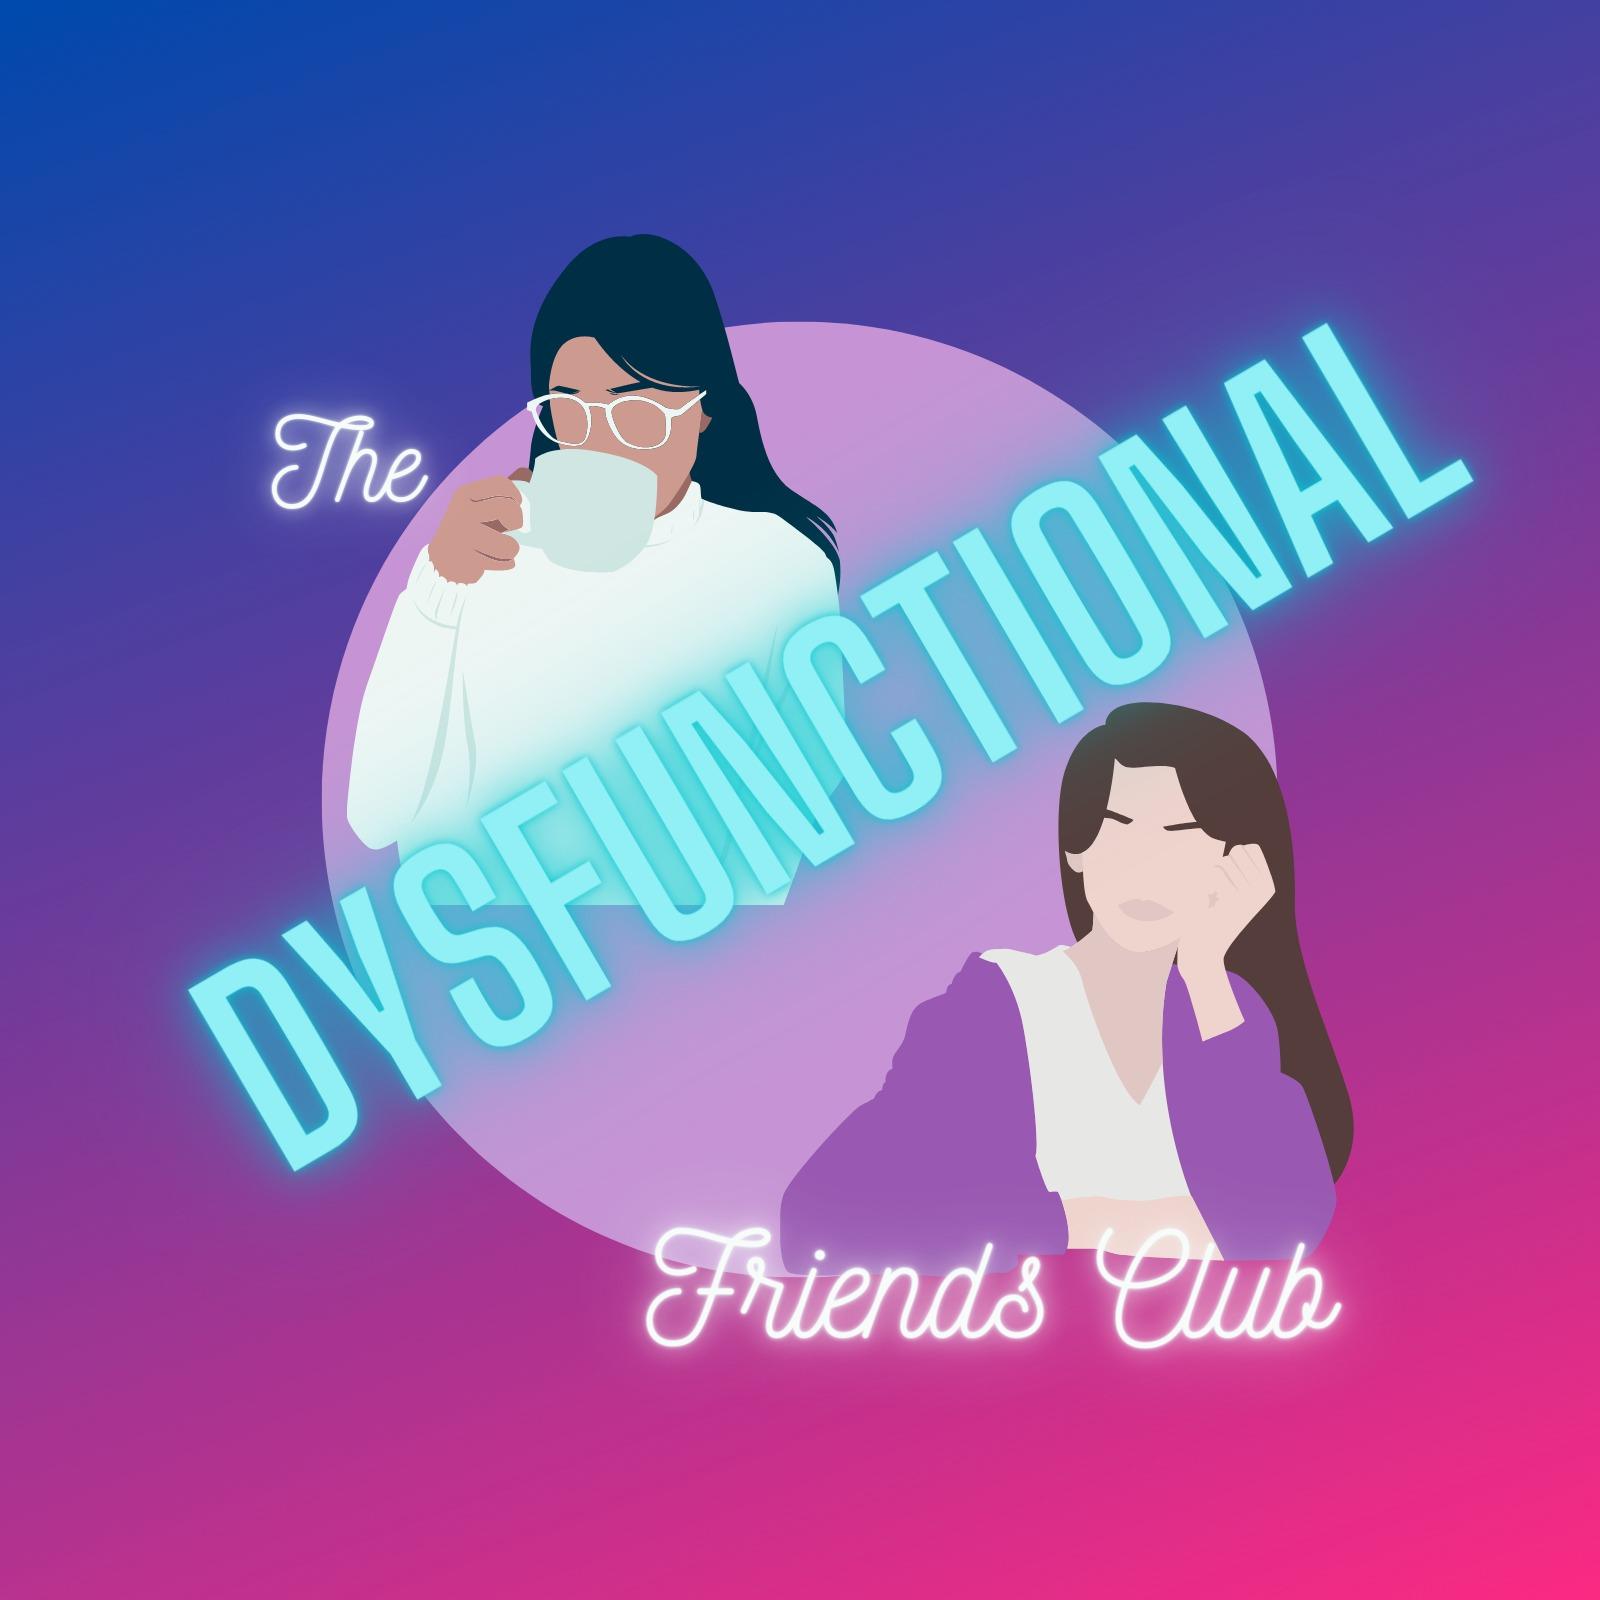 The Dysfunctional Friends Club